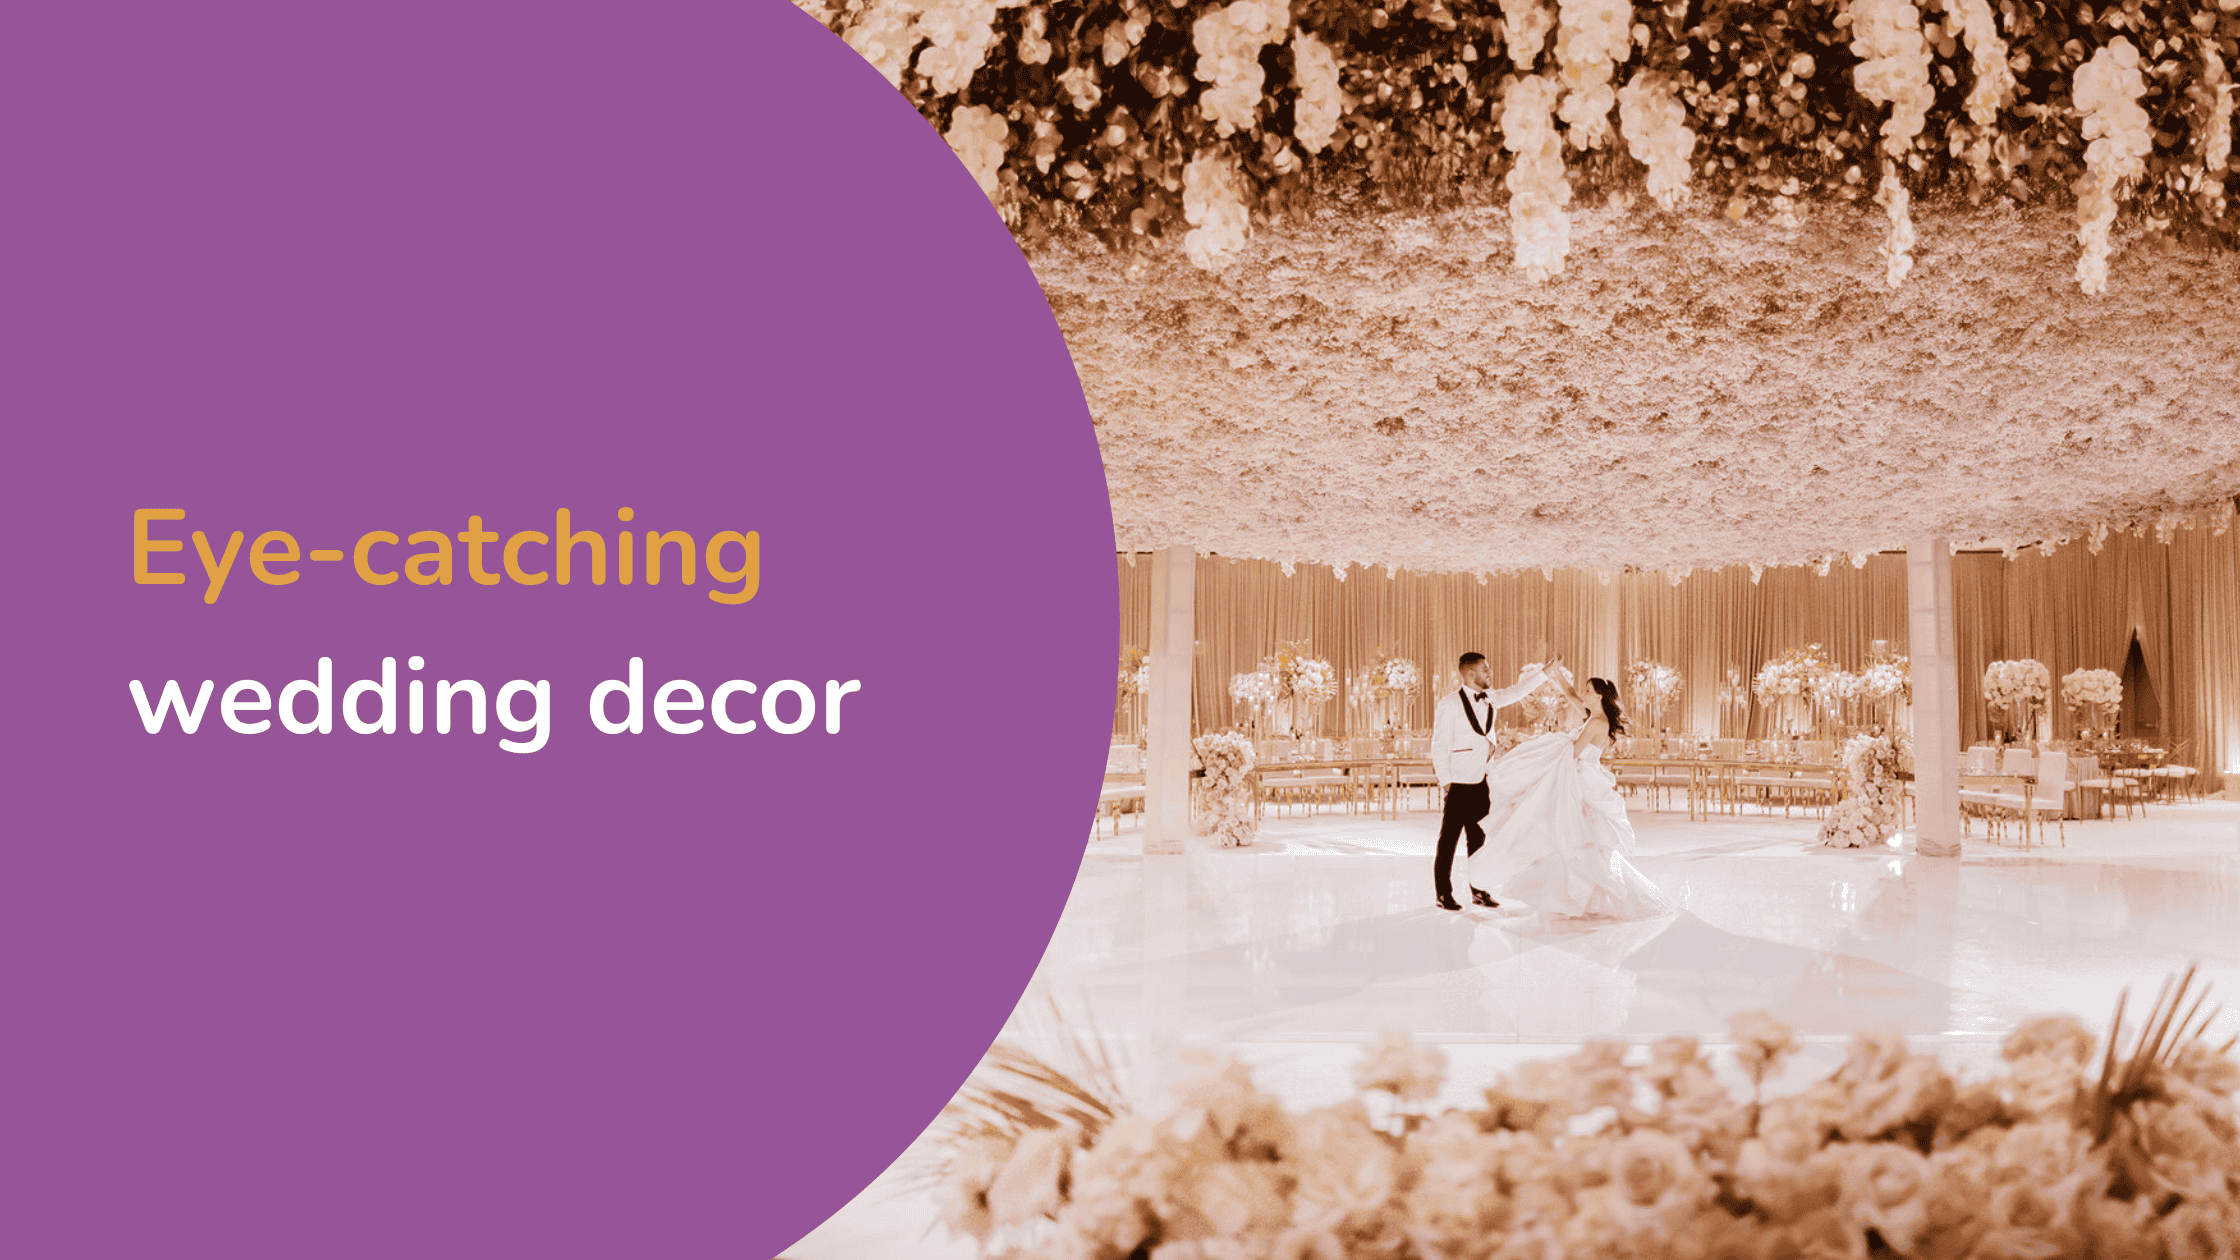 Header image of a newly wed couple having their first dance surrounded by flowers with the overlay 'eye-catching wedding decor'